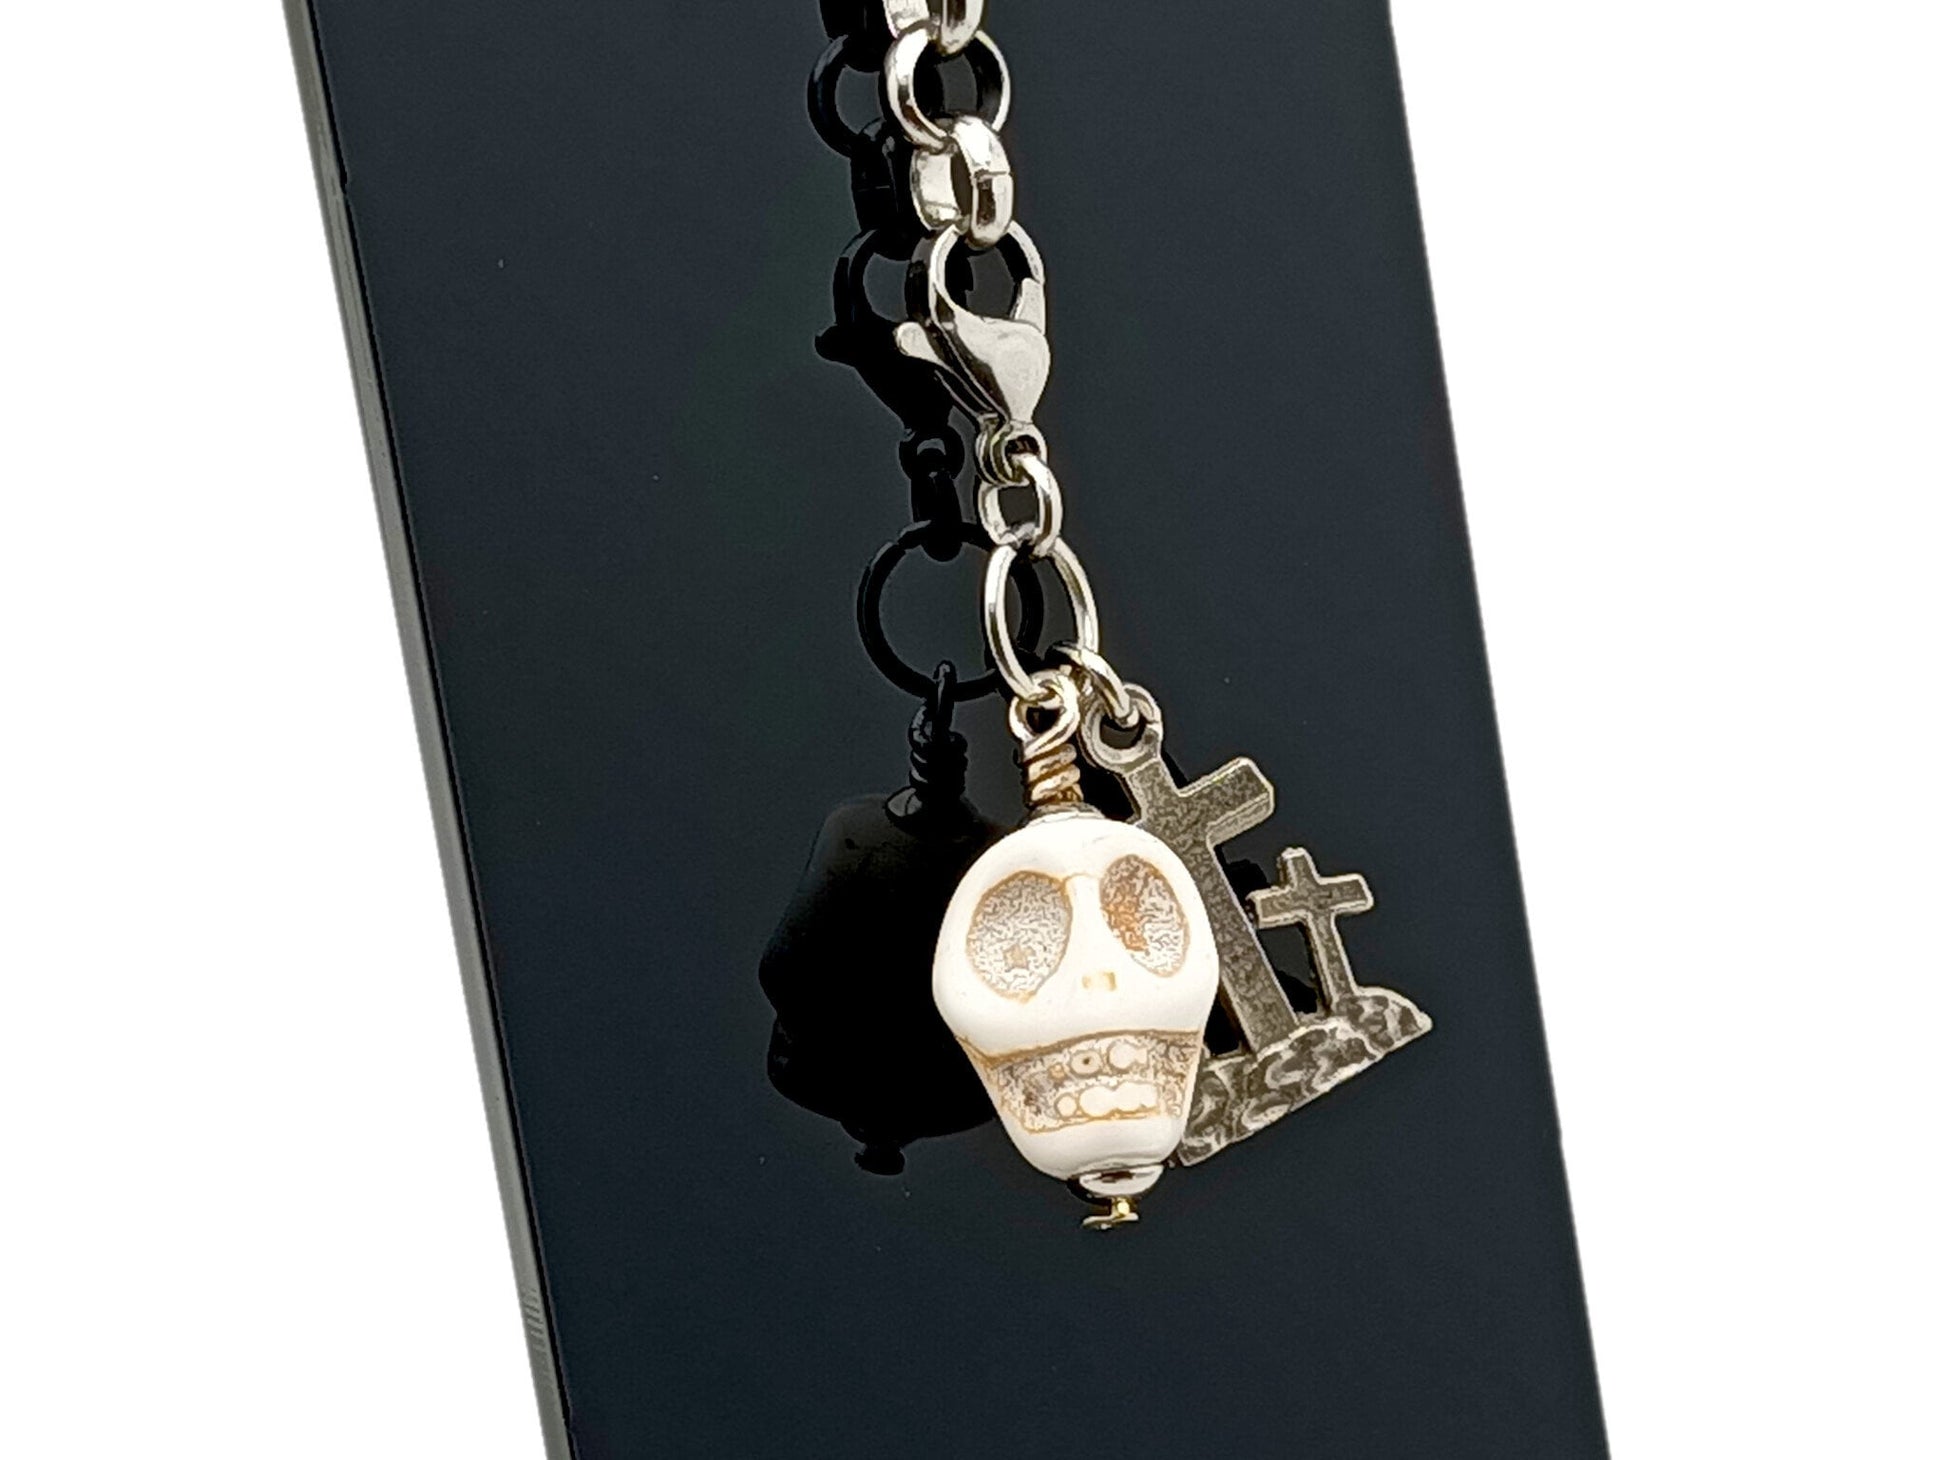 Large Memento Mori unique rosary beads howlite purse clip key fob key chain with stainless steel lobster clasp and three cross medal.